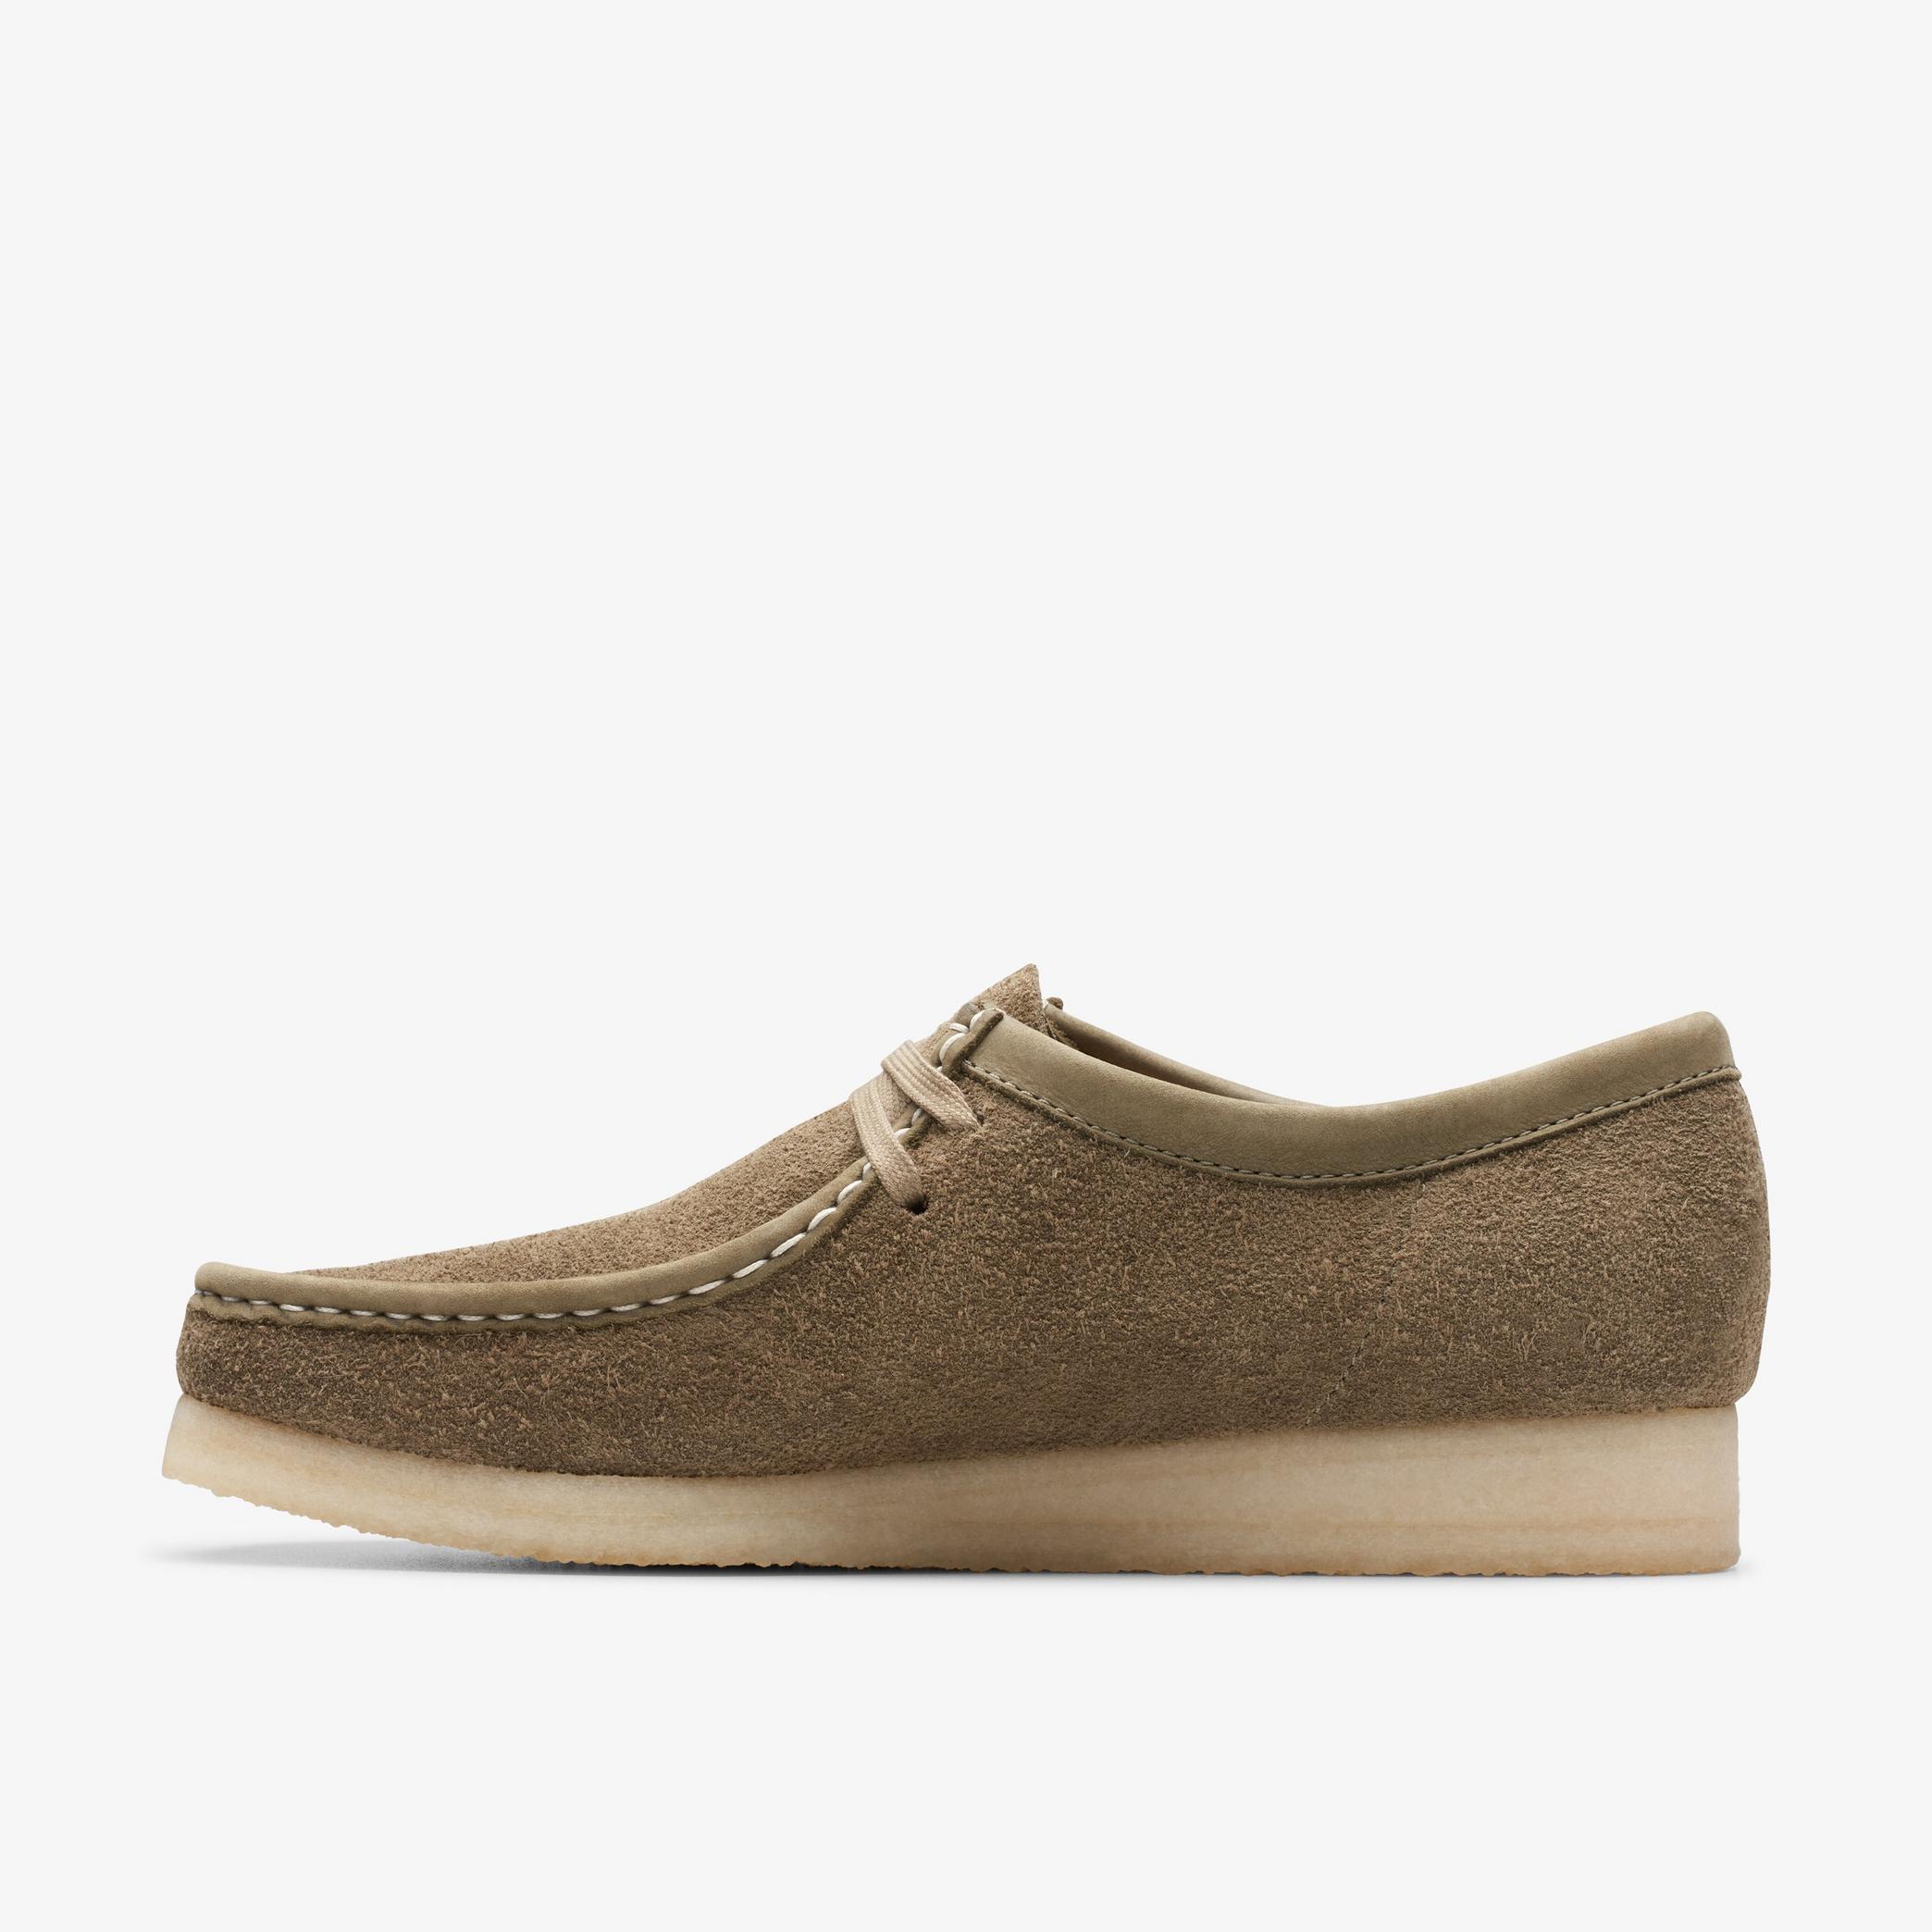 Wallabee Pale Khaki Suede Wallabee, view 2 of 7